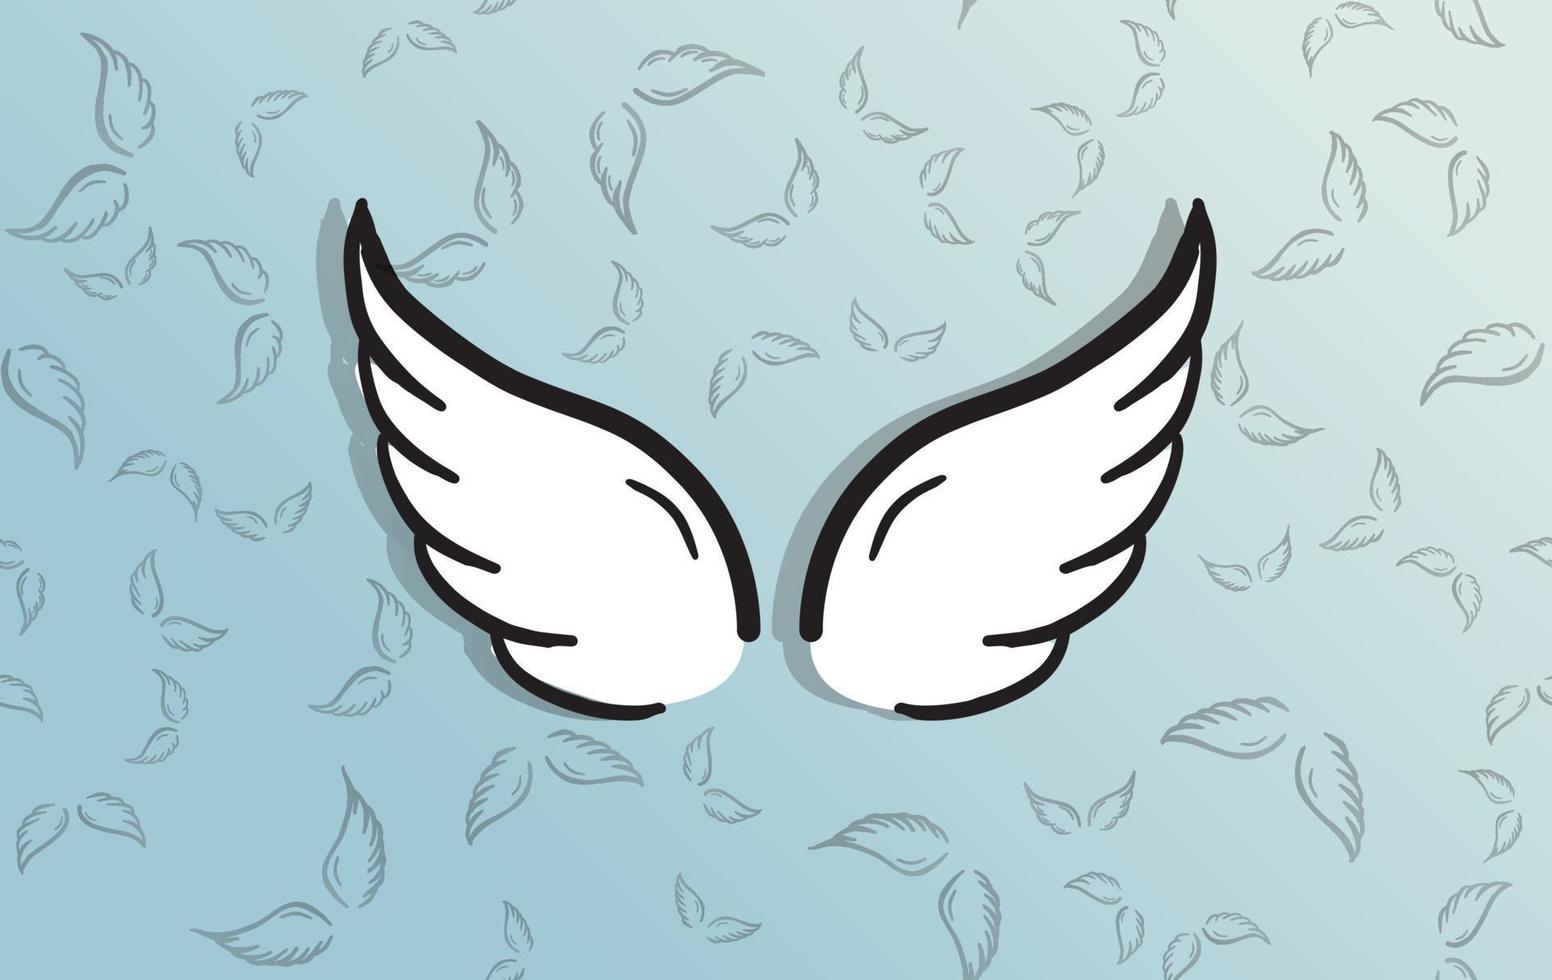 https://static.vecteezy.com/system/resources/previews/008/361/163/non_2x/angel-wings-hand-drawn-illustration-vector.jpg